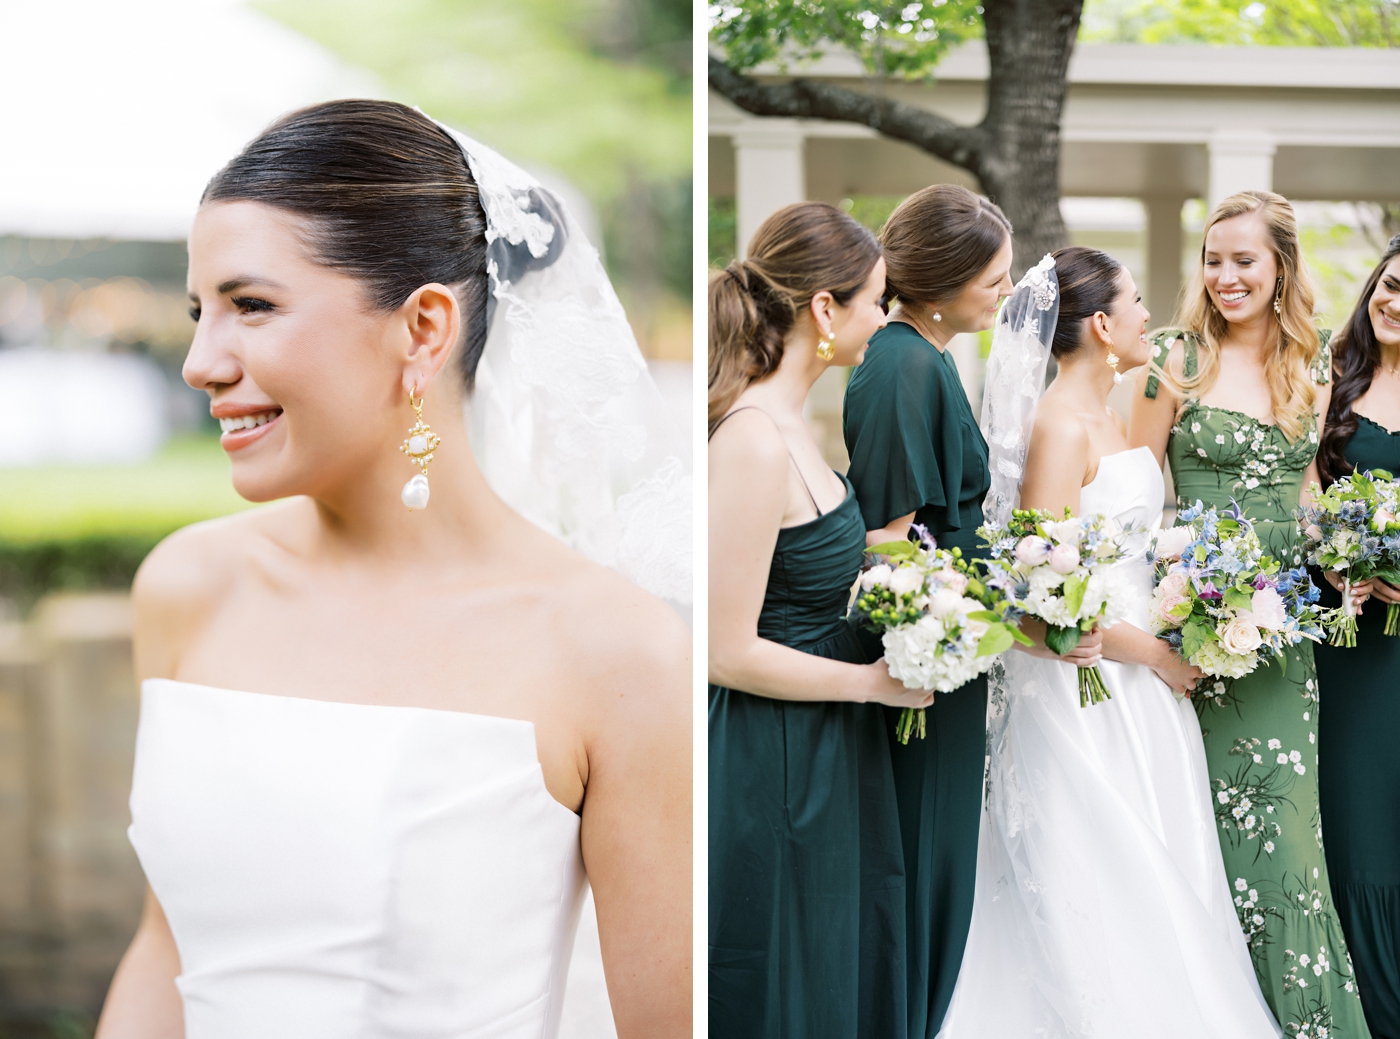 Bridal portrait next to an image of bridesmaids in green dresses for an Austin wedding